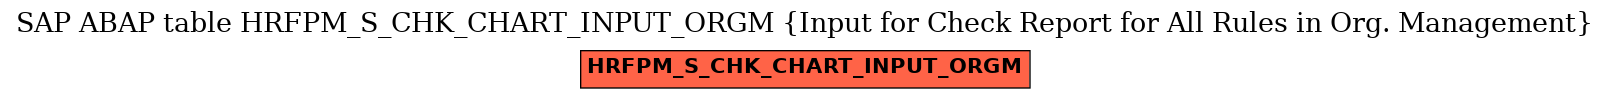 E-R Diagram for table HRFPM_S_CHK_CHART_INPUT_ORGM (Input for Check Report for All Rules in Org. Management)